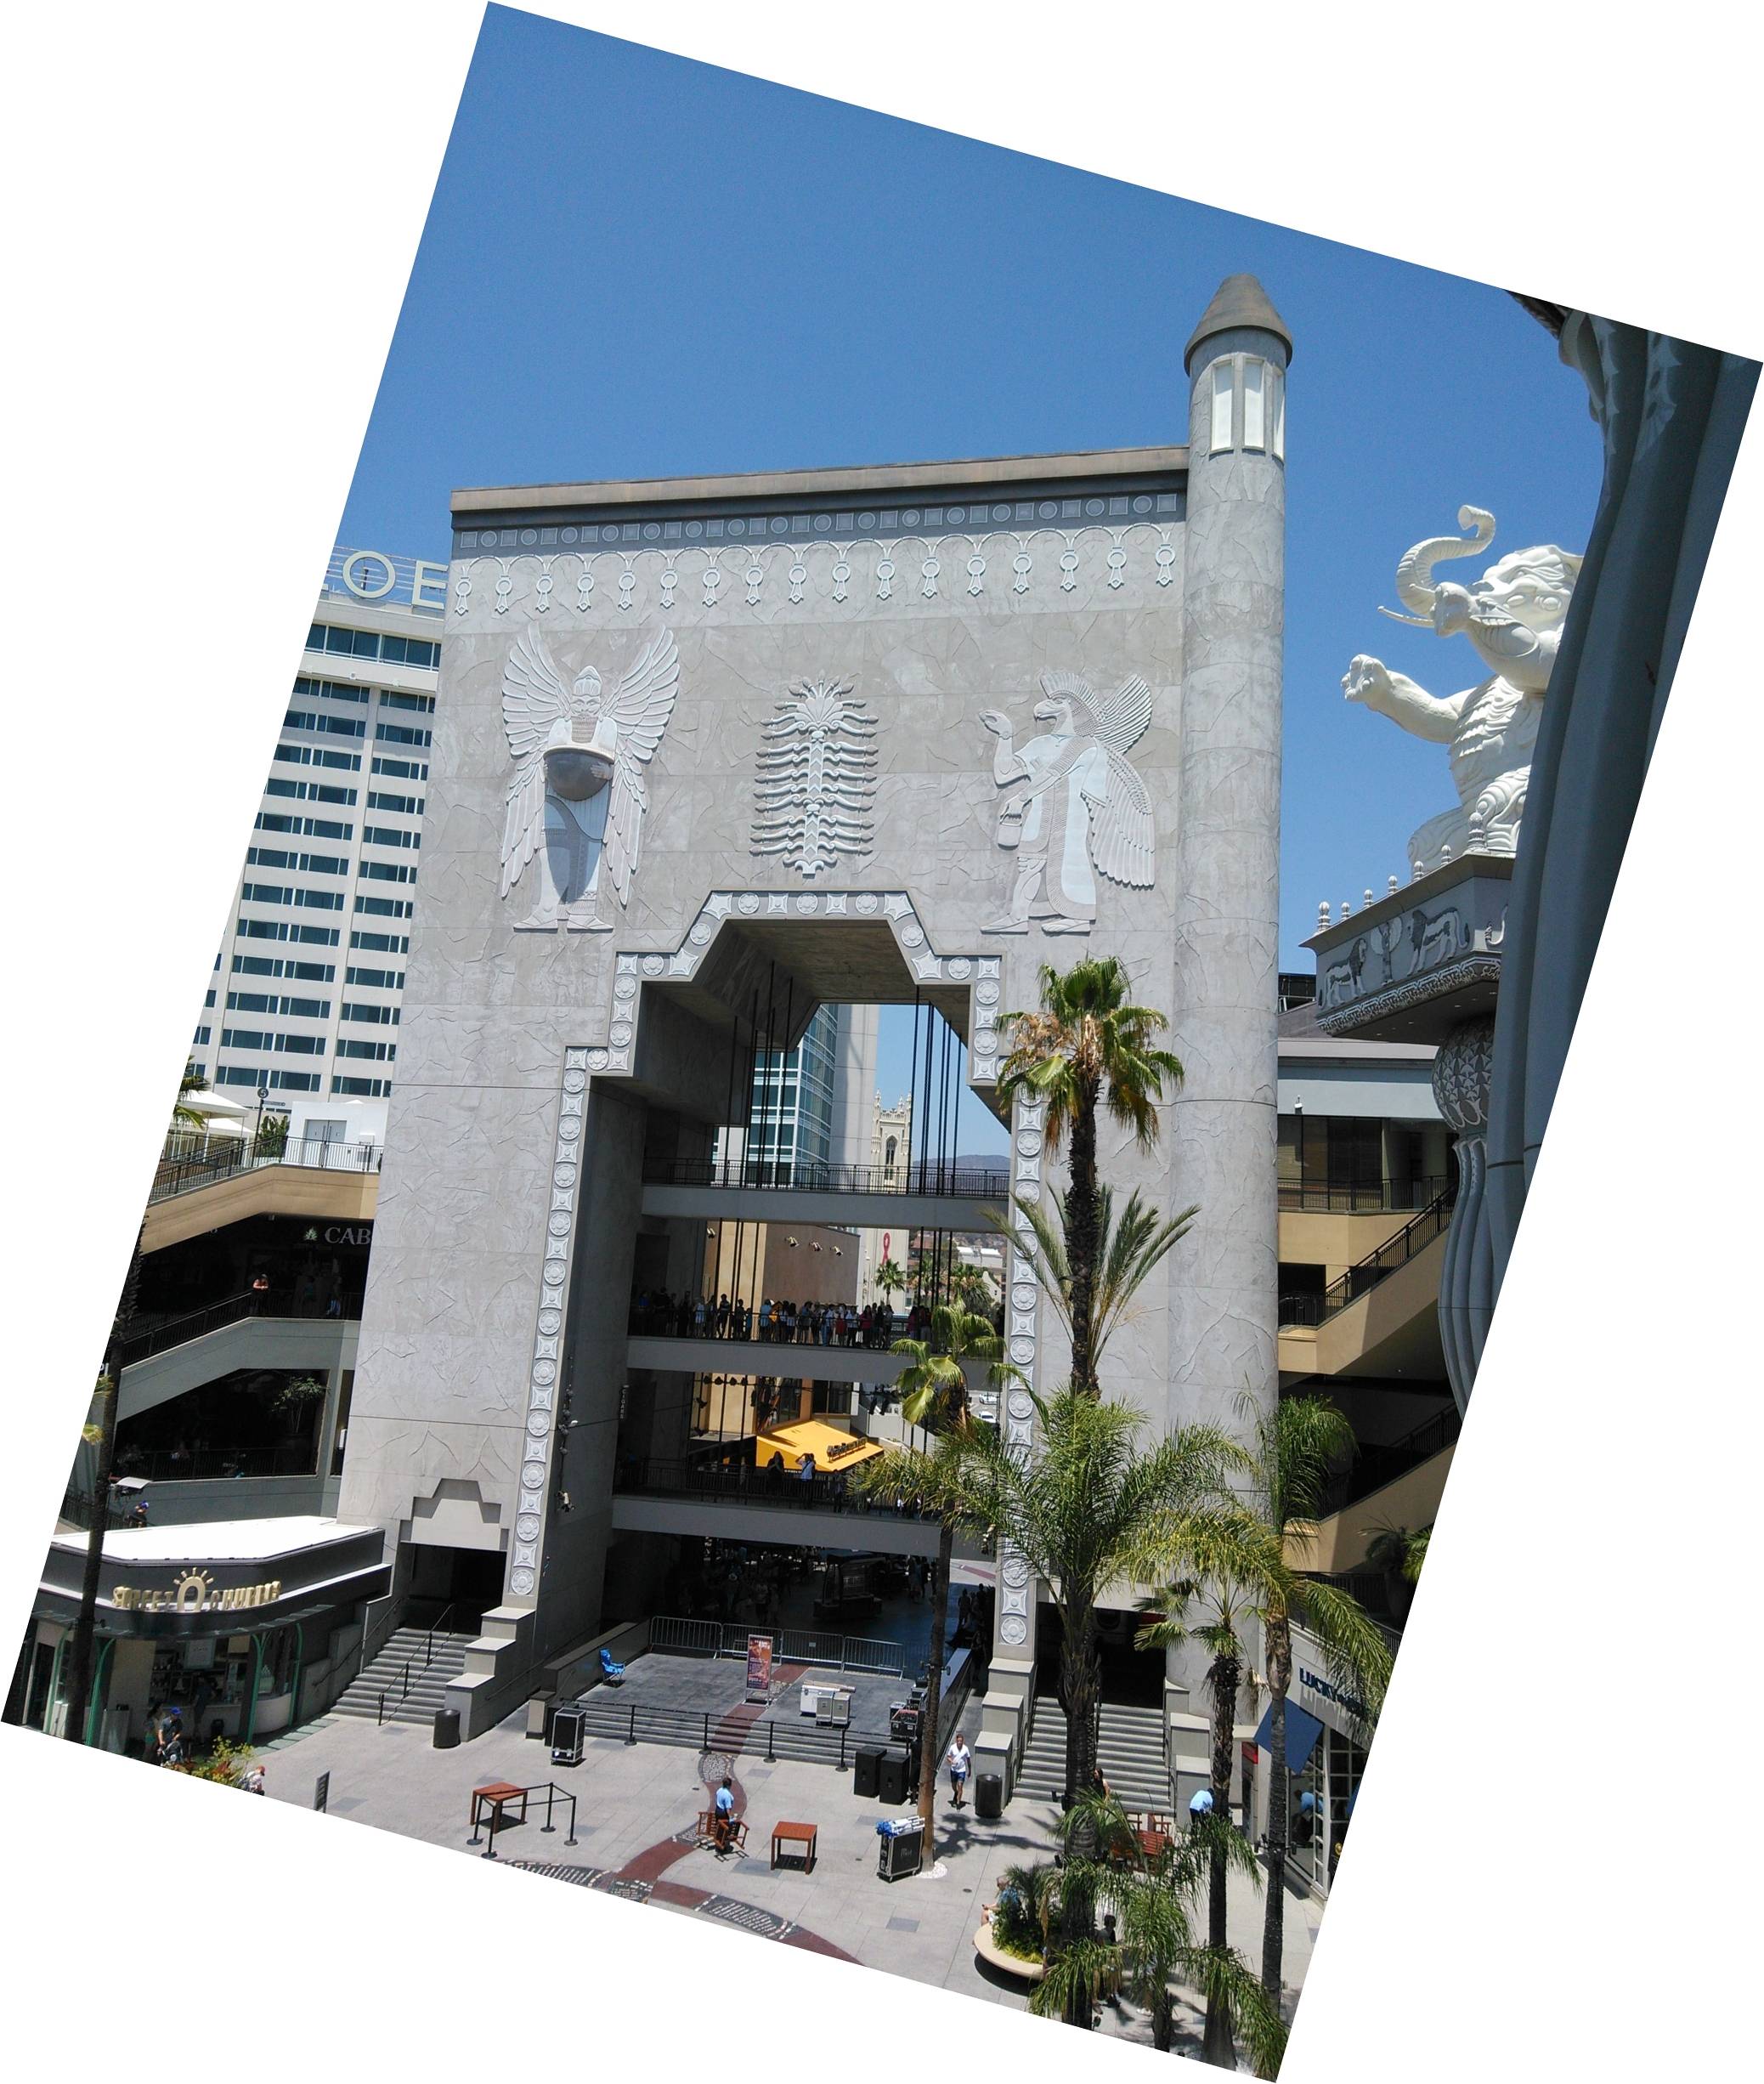 Image: The Hollywood and Highland Center